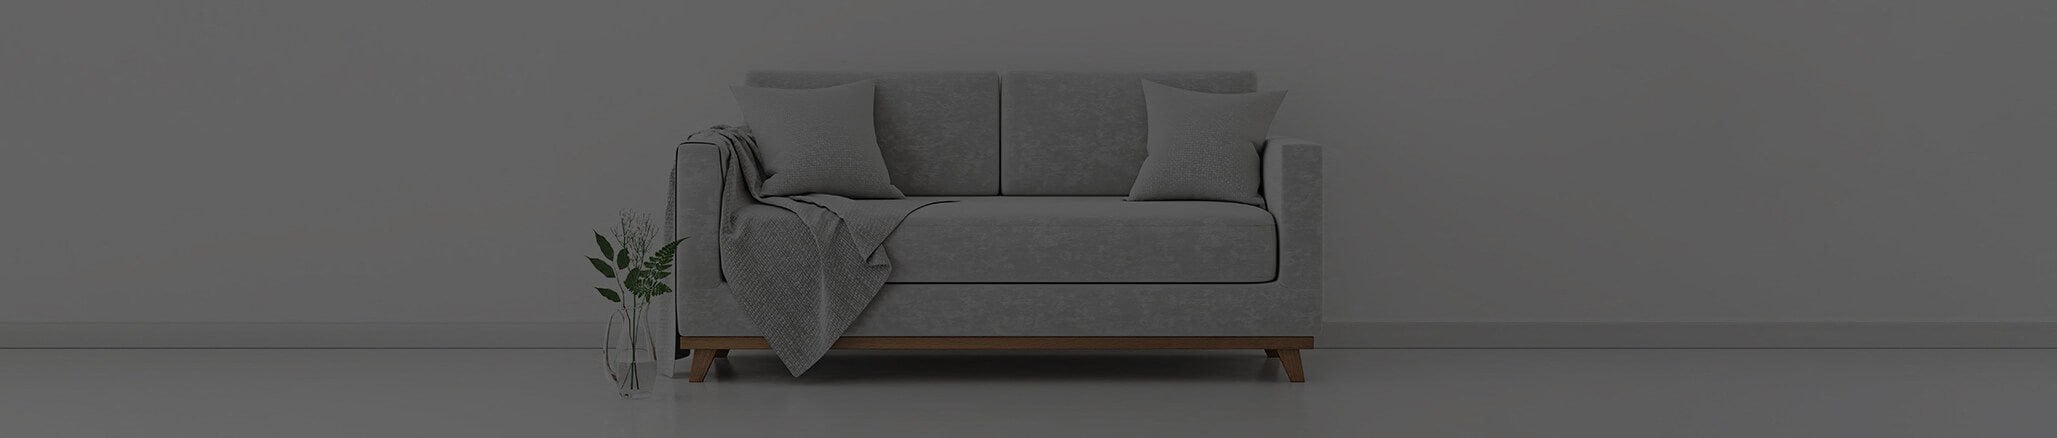 Gray couch with a white background and a vase